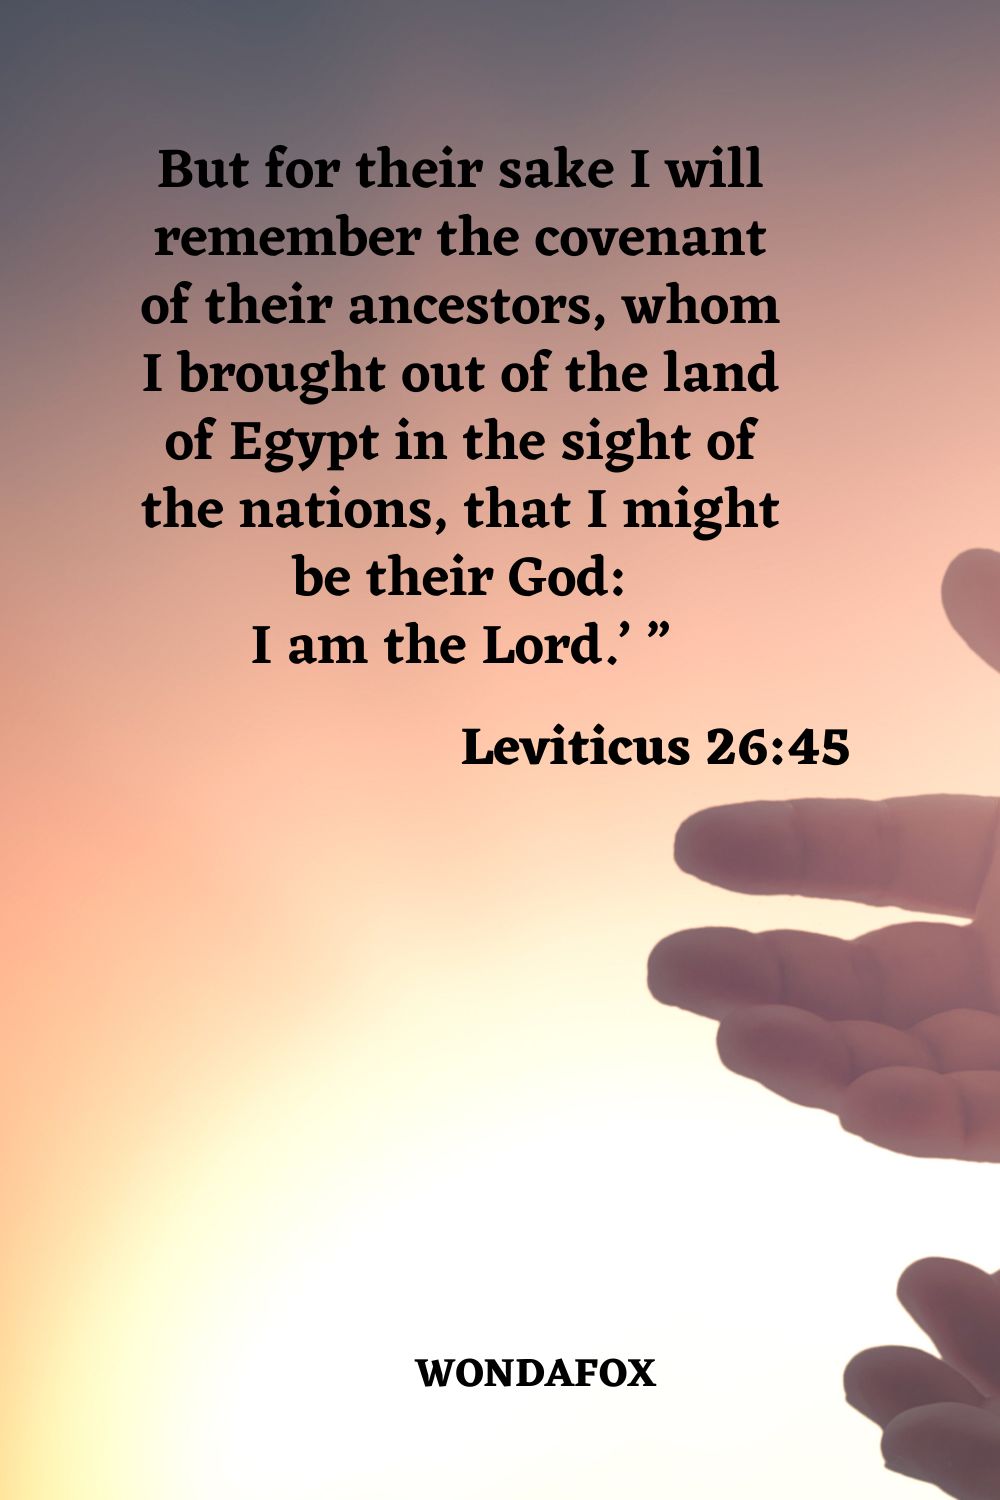  But for their sake I will remember the covenant of their ancestors, whom I brought out of the land of Egypt in the sight of the nations, that I might be their God:
I am the Lord.’ ”
Leviticus 26:45